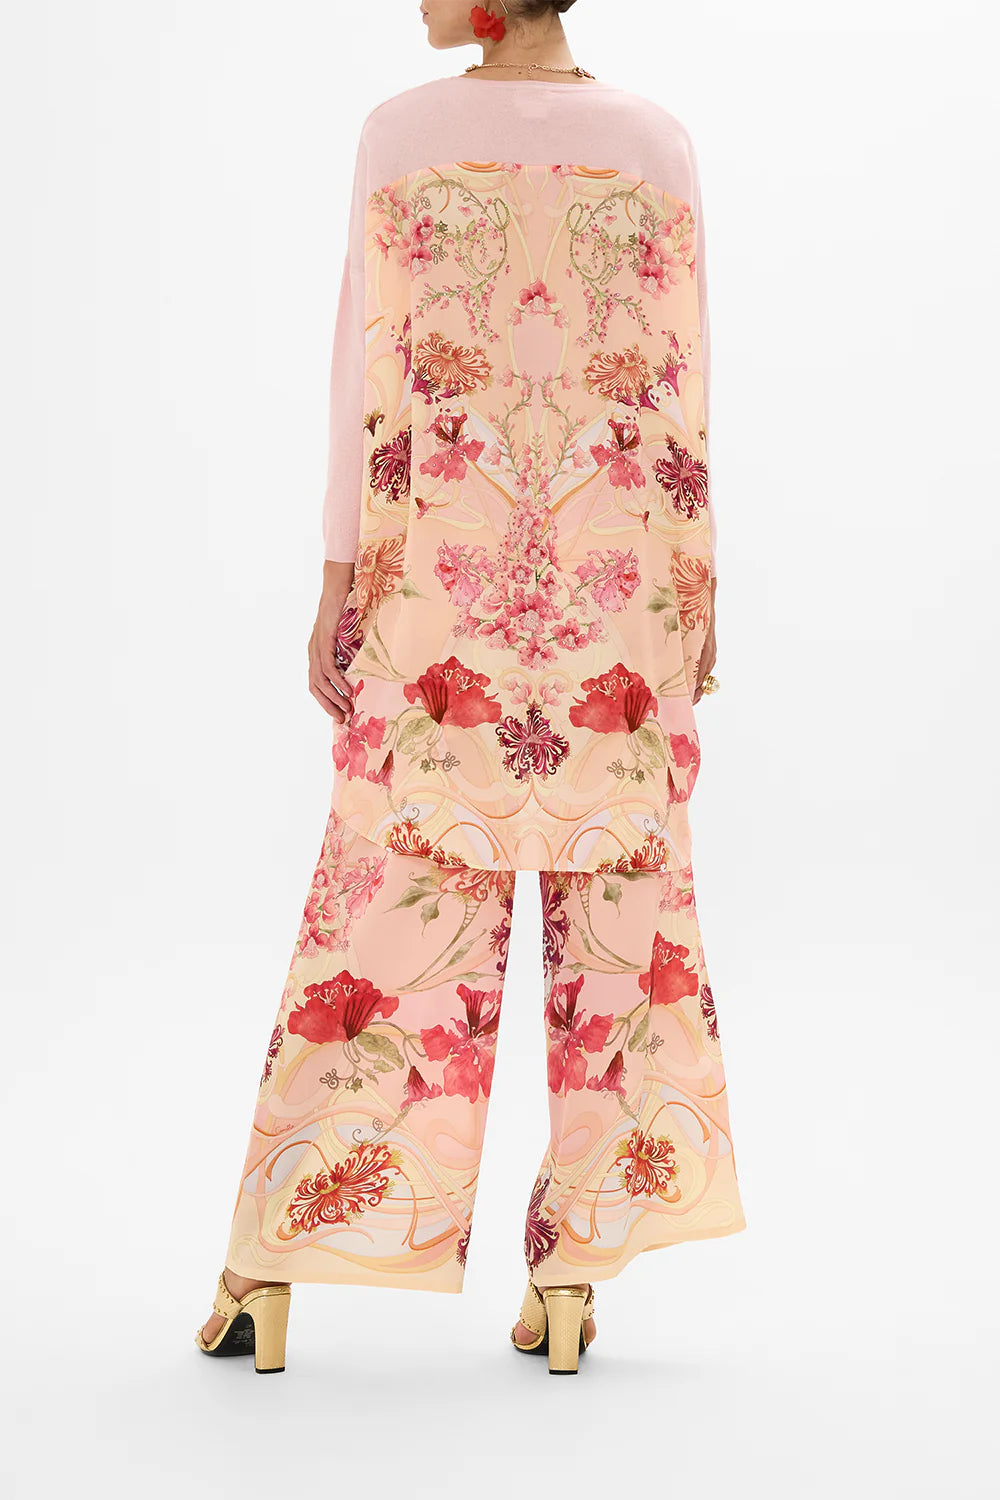 CAMILLA | Blossoms And Brushstrokes Long Sleeve Jumper With Print Back